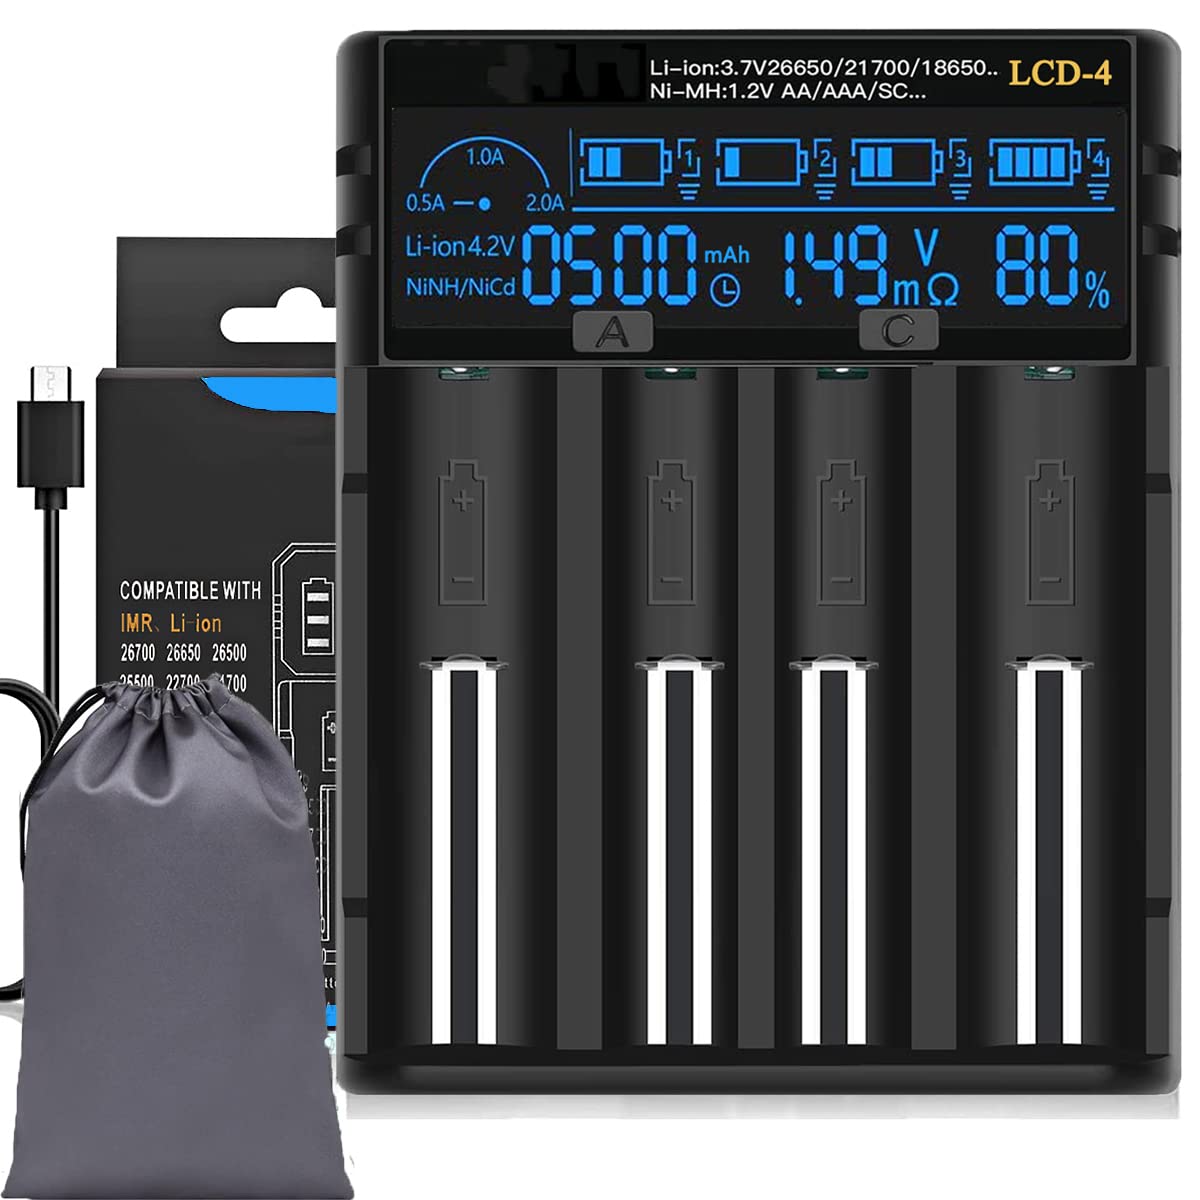 Universal Fast 18650 Battery Charger with LCD Display Battery Capacity Information, Suitable for 3.7v 1.2v Batteries 26650 18650 18490 18350 17670 17500 16340 14500 RCR123A Ni-MH Ni-Cd AAA AA